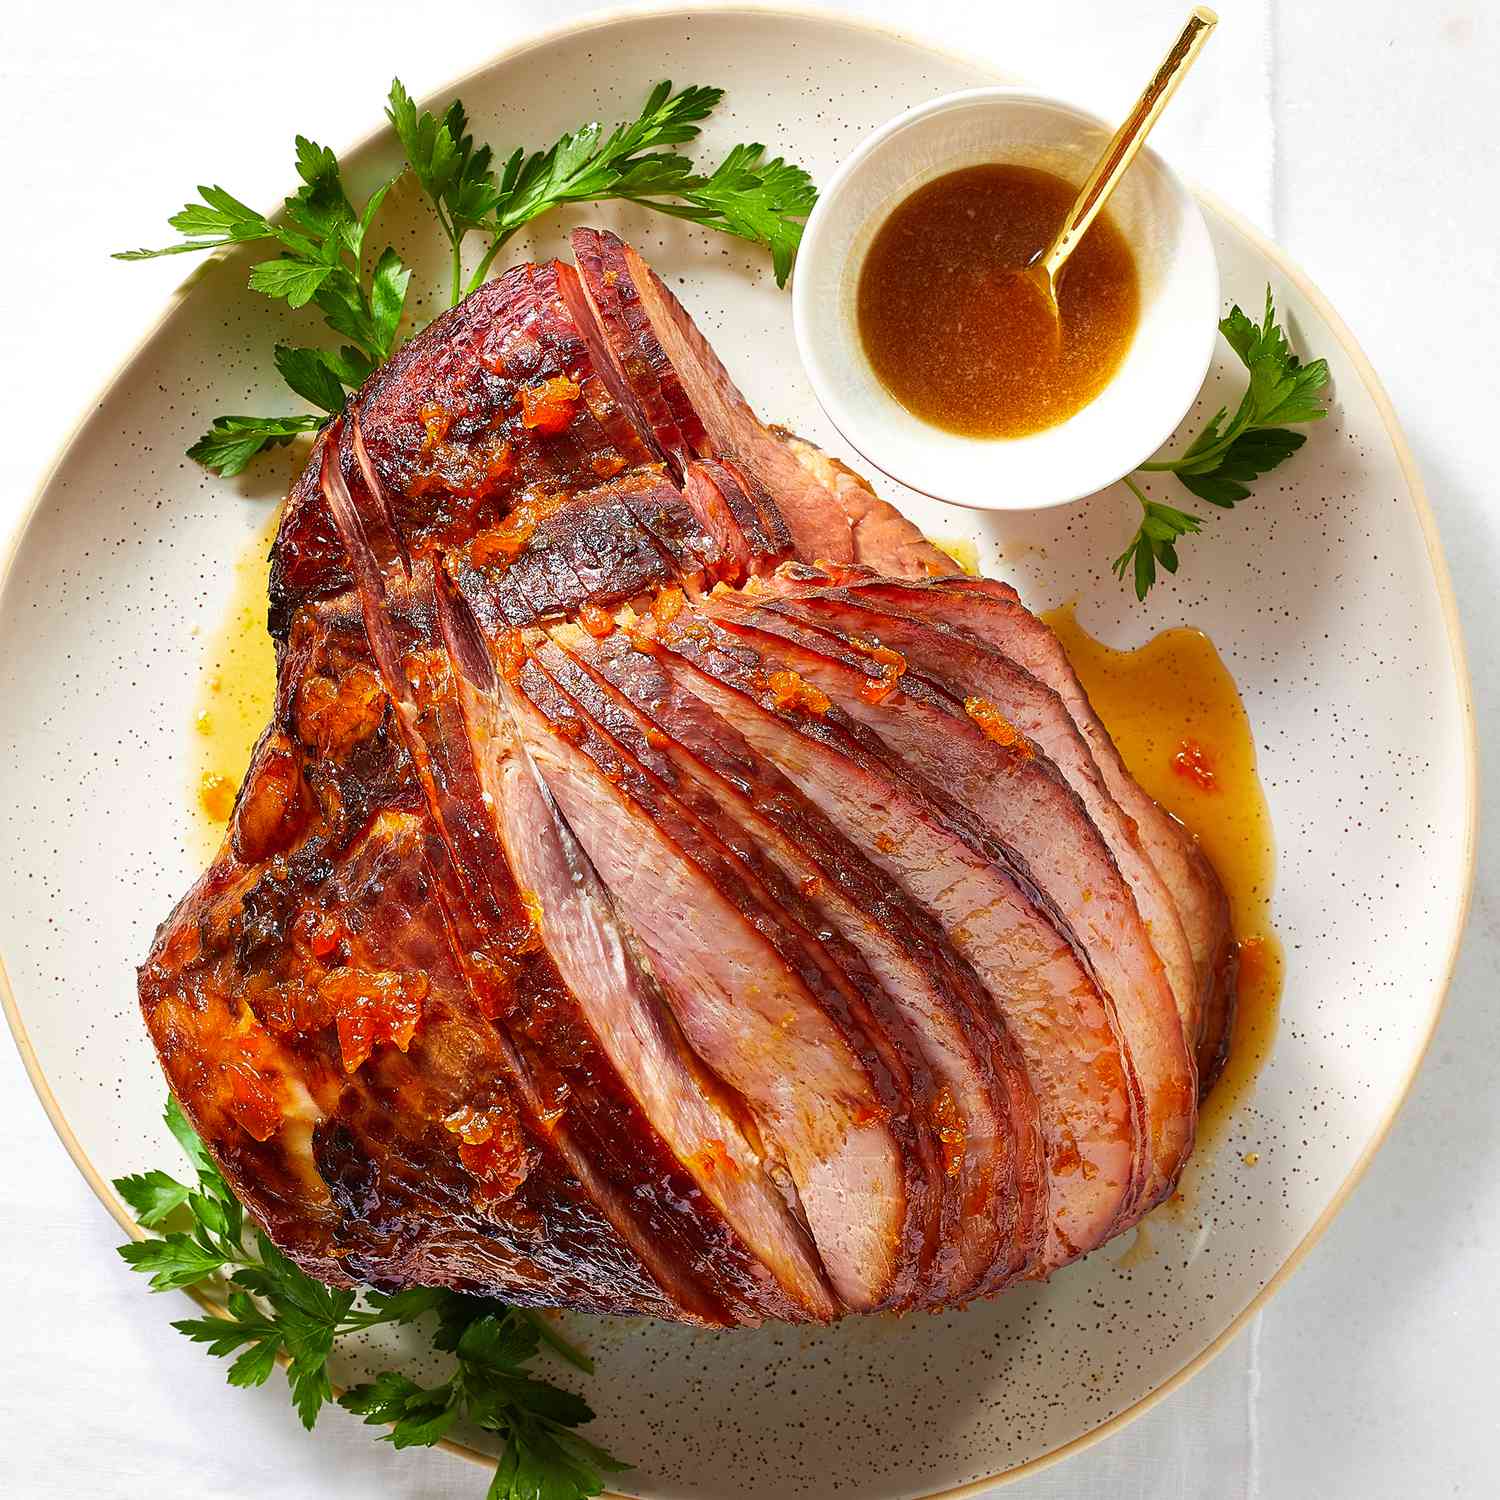 Looking down at a apricot brown sugar ham, sliced and served on a plate